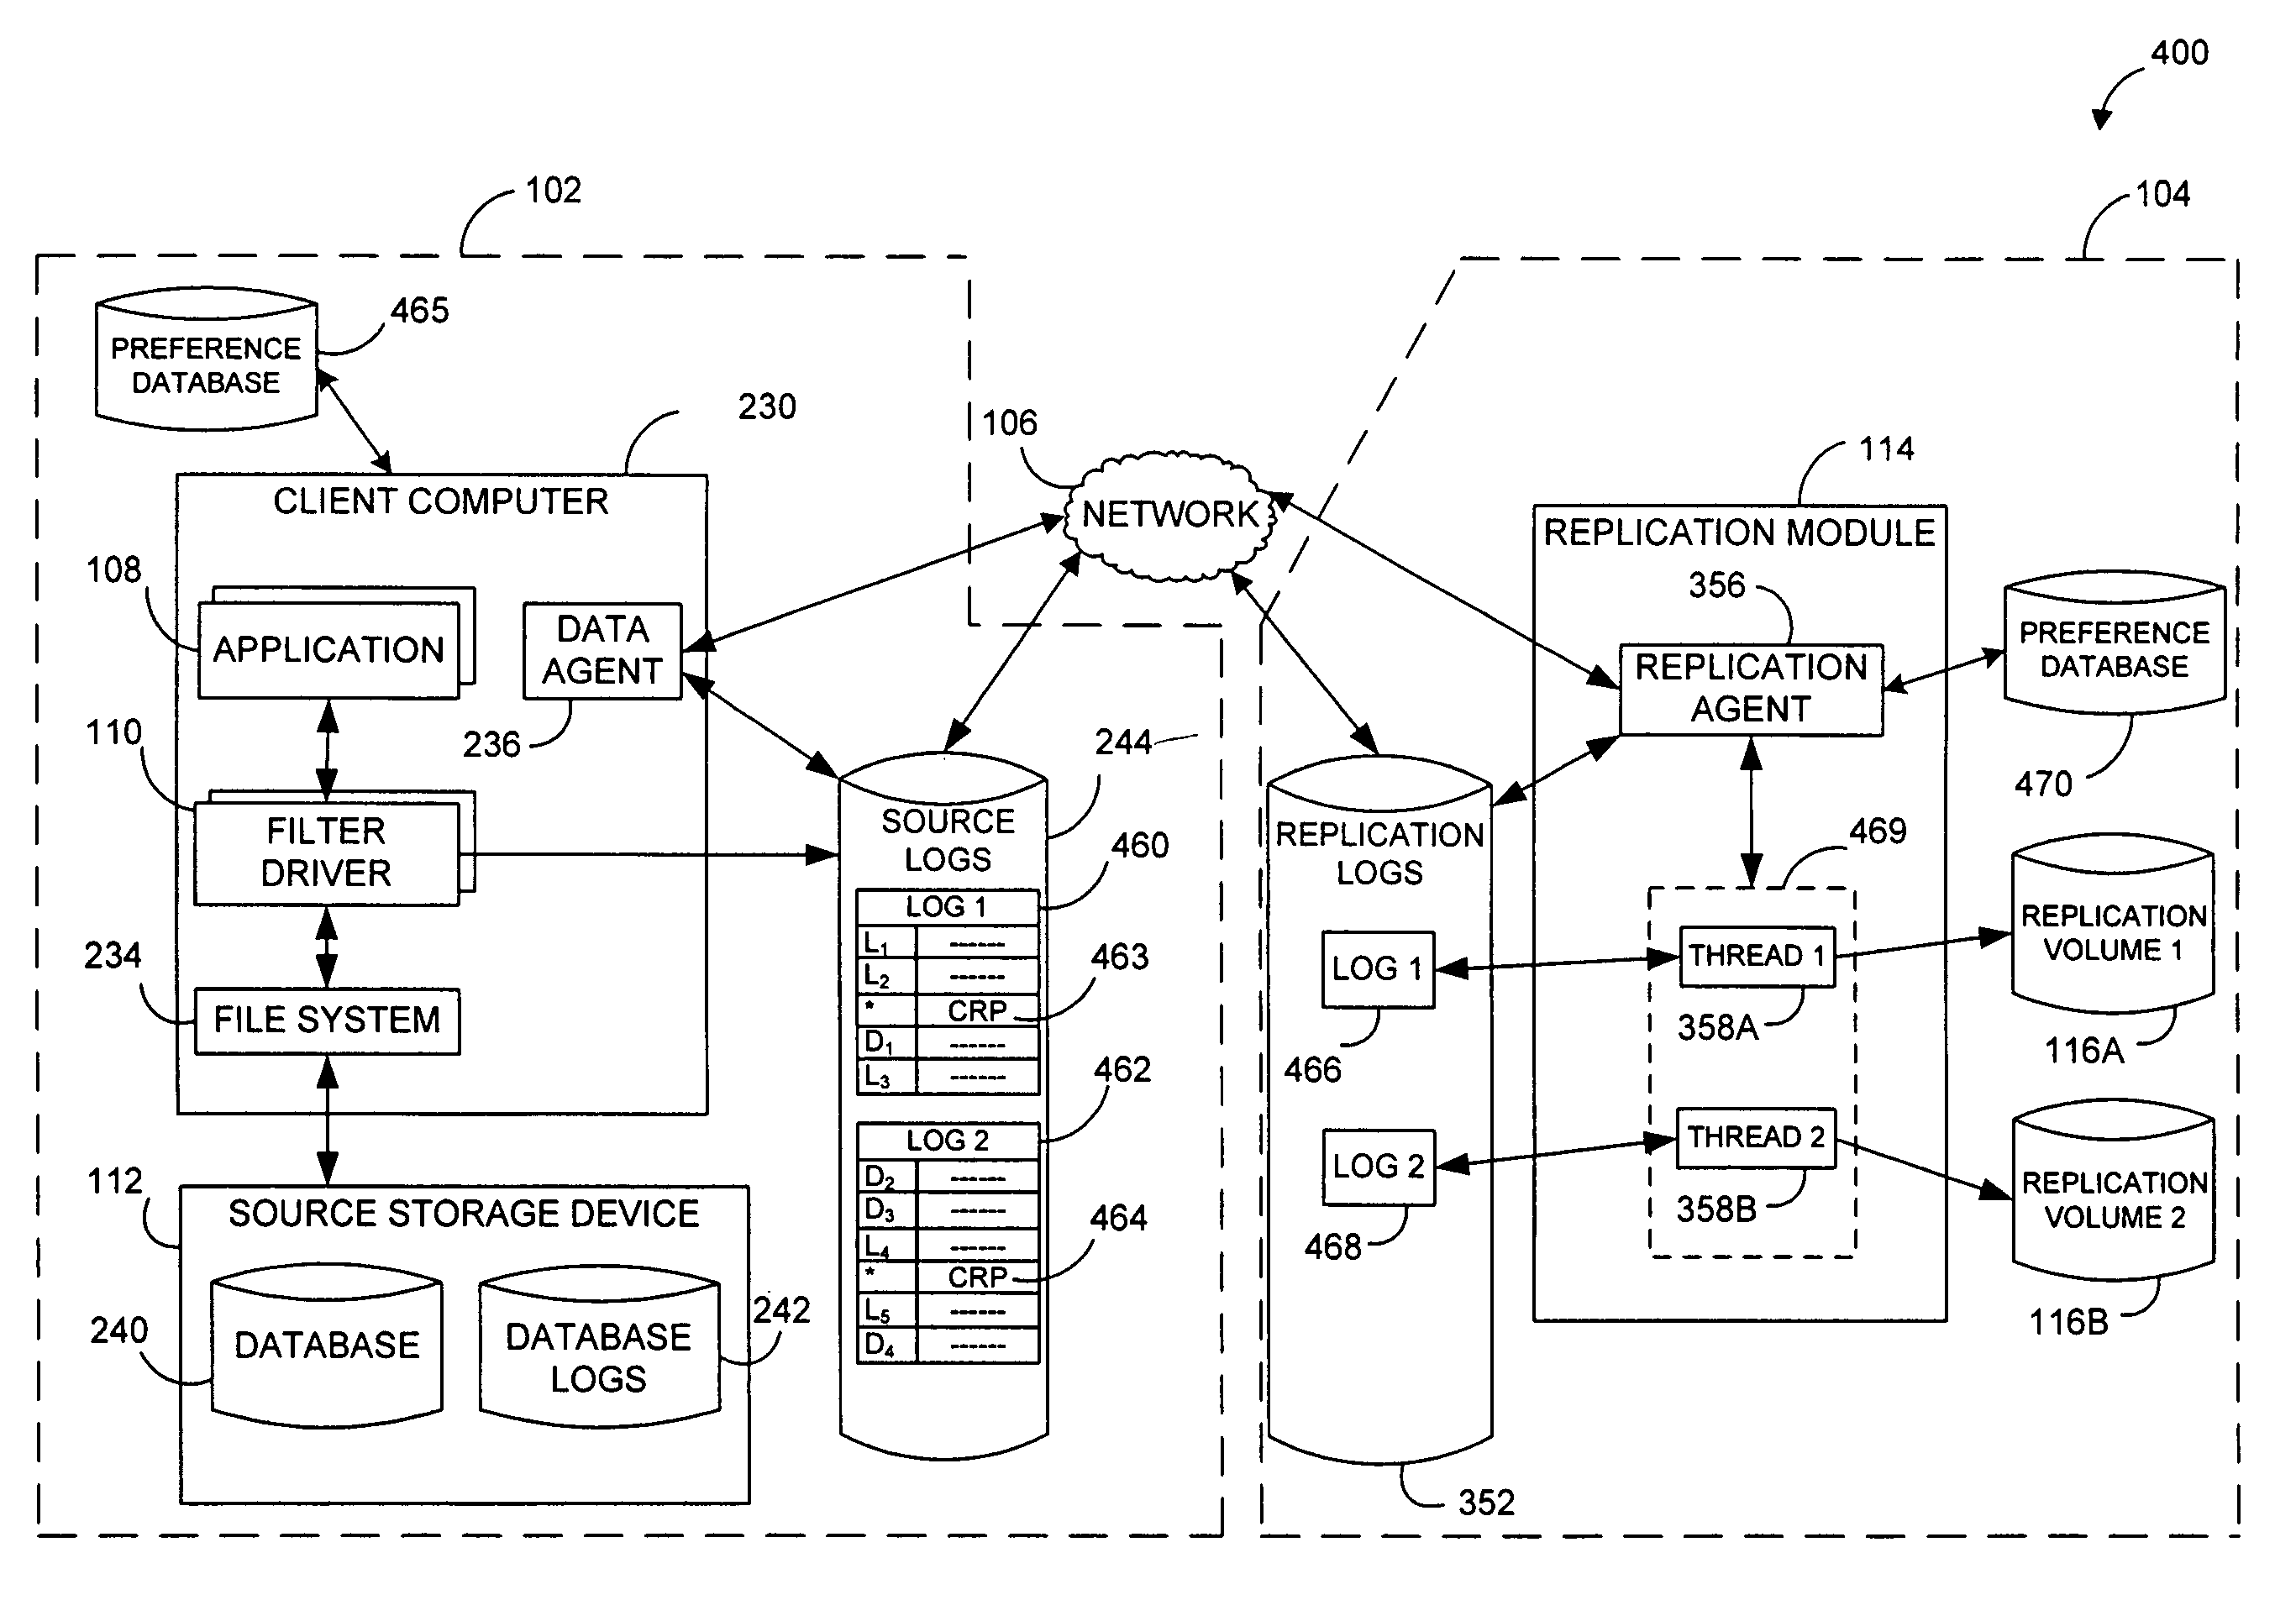 Network redirector systems and methods for performing data replication